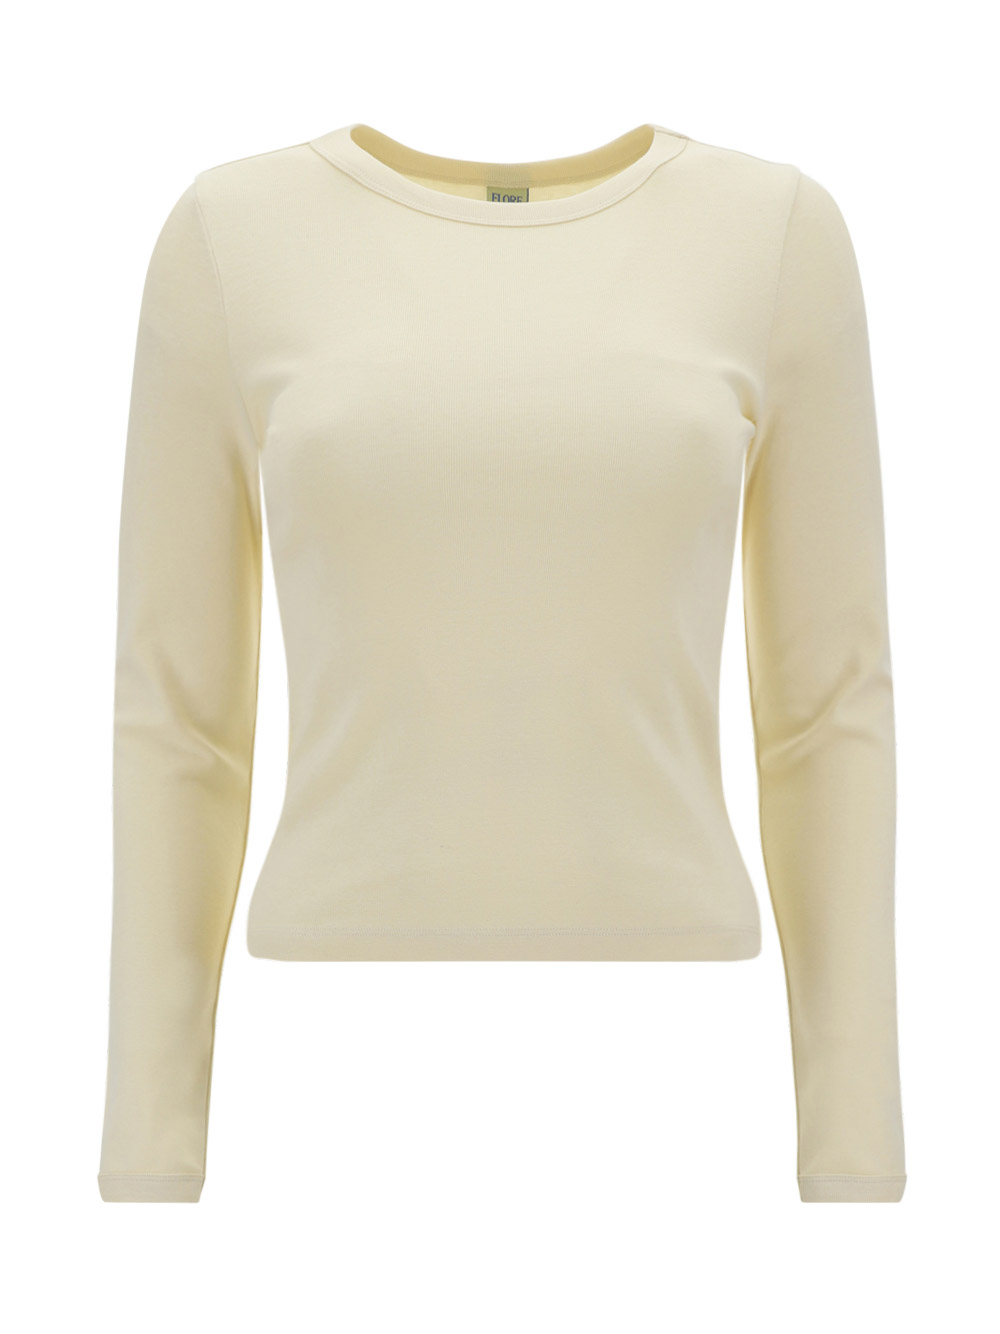 Flore Flore Long Sleeve Jersey In Off White